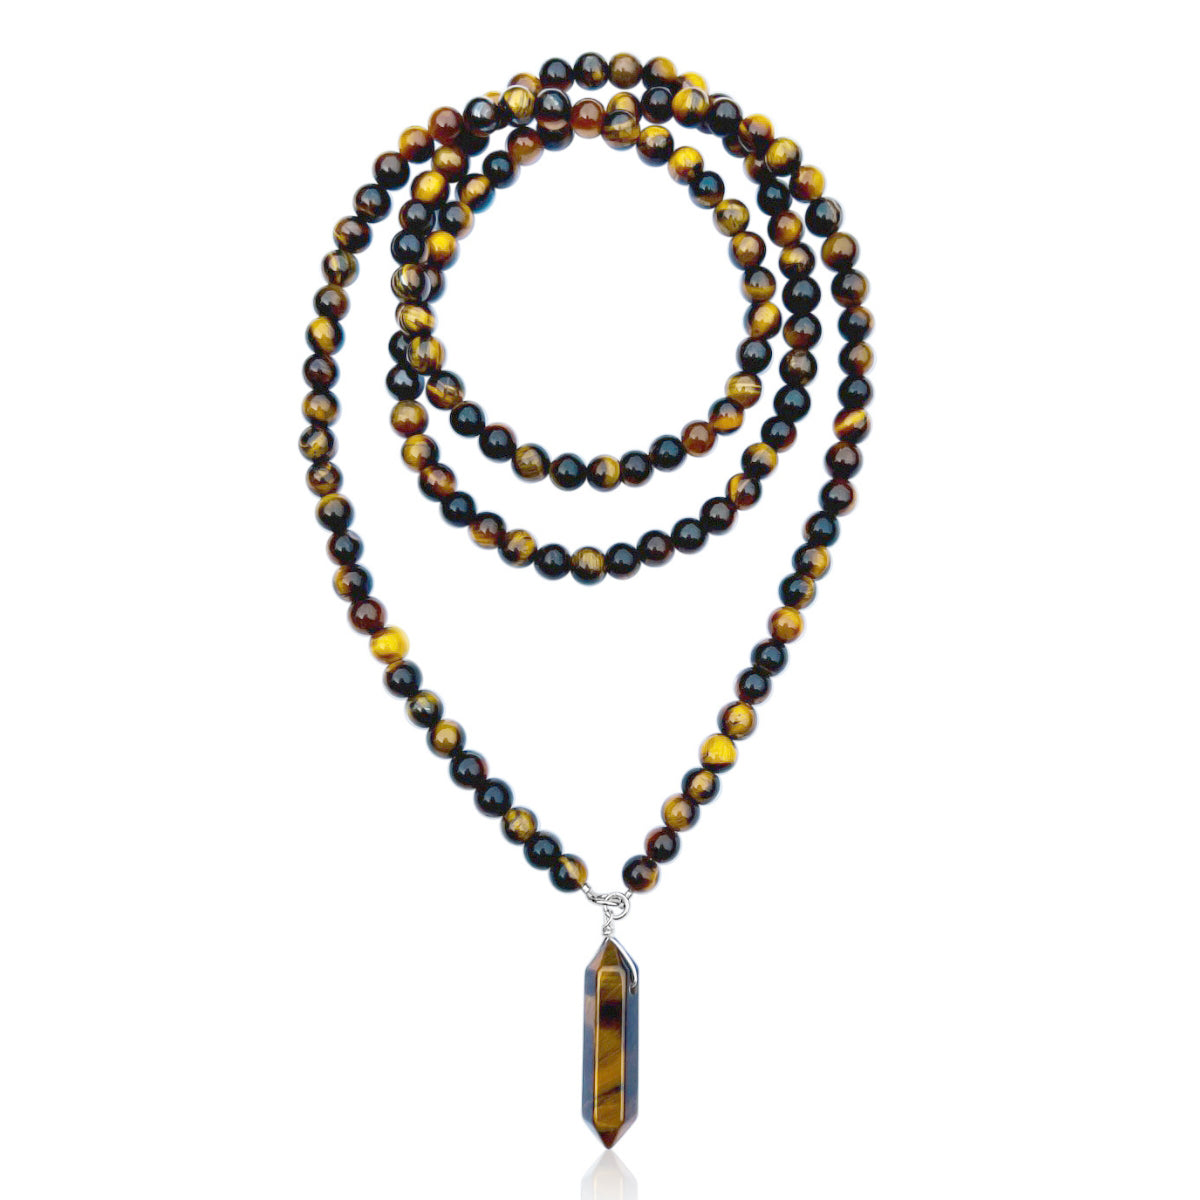 The Empowerment Enhancer Necklace is made of a gemstone that embody the strength and confidence of the majestic tiger. This necklace features polished Tiger Eye stone, which is known for its unique golden-brown color and distinctive chatoyancy, or "cat's eye" effect.